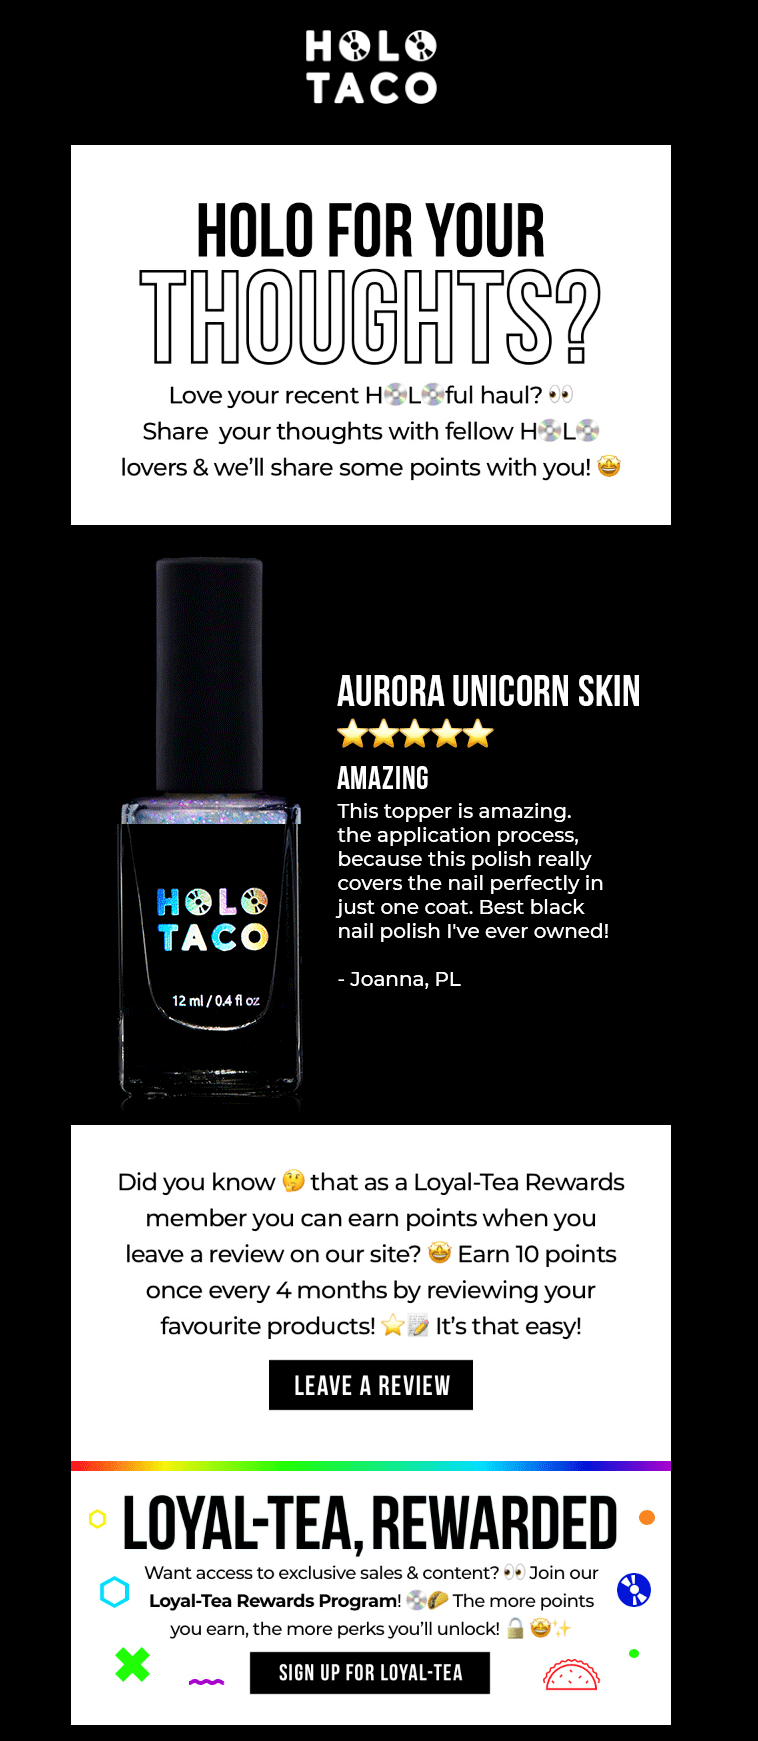 transactional email from Holo Taco